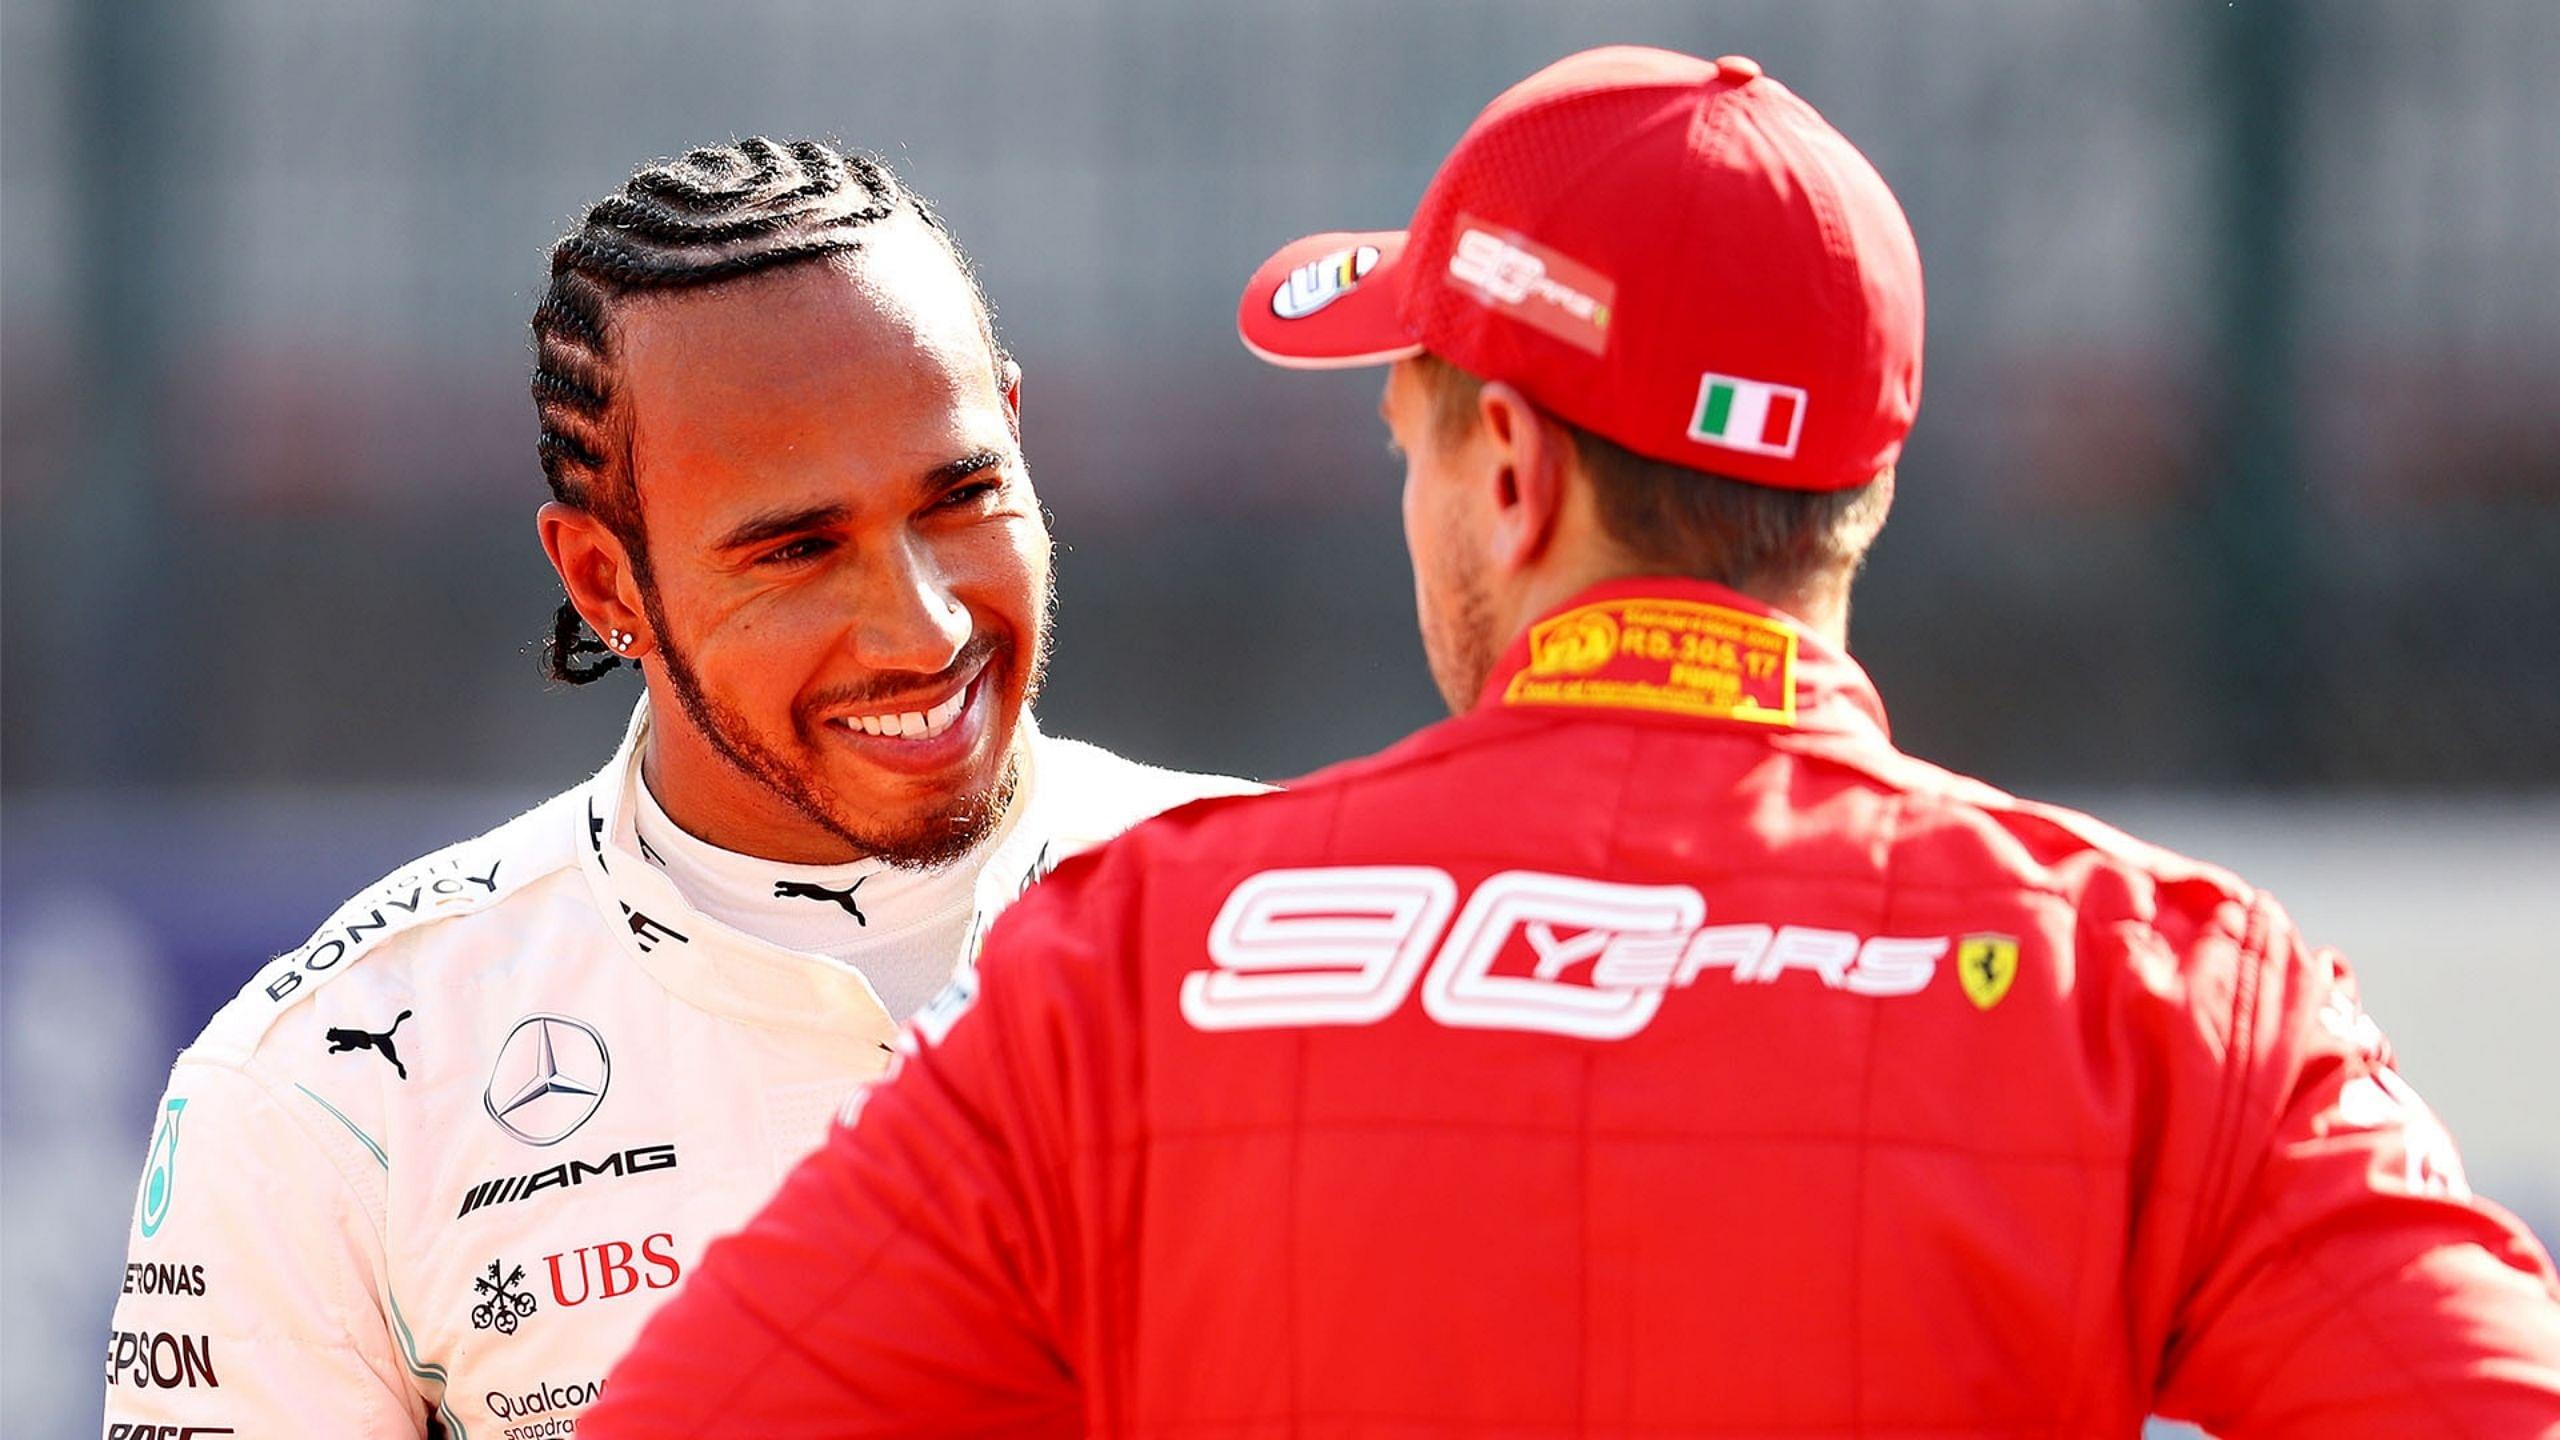 F1 Driver Salary: Is a pay cut to Lewis Hamilton justified? The arguments for and against it